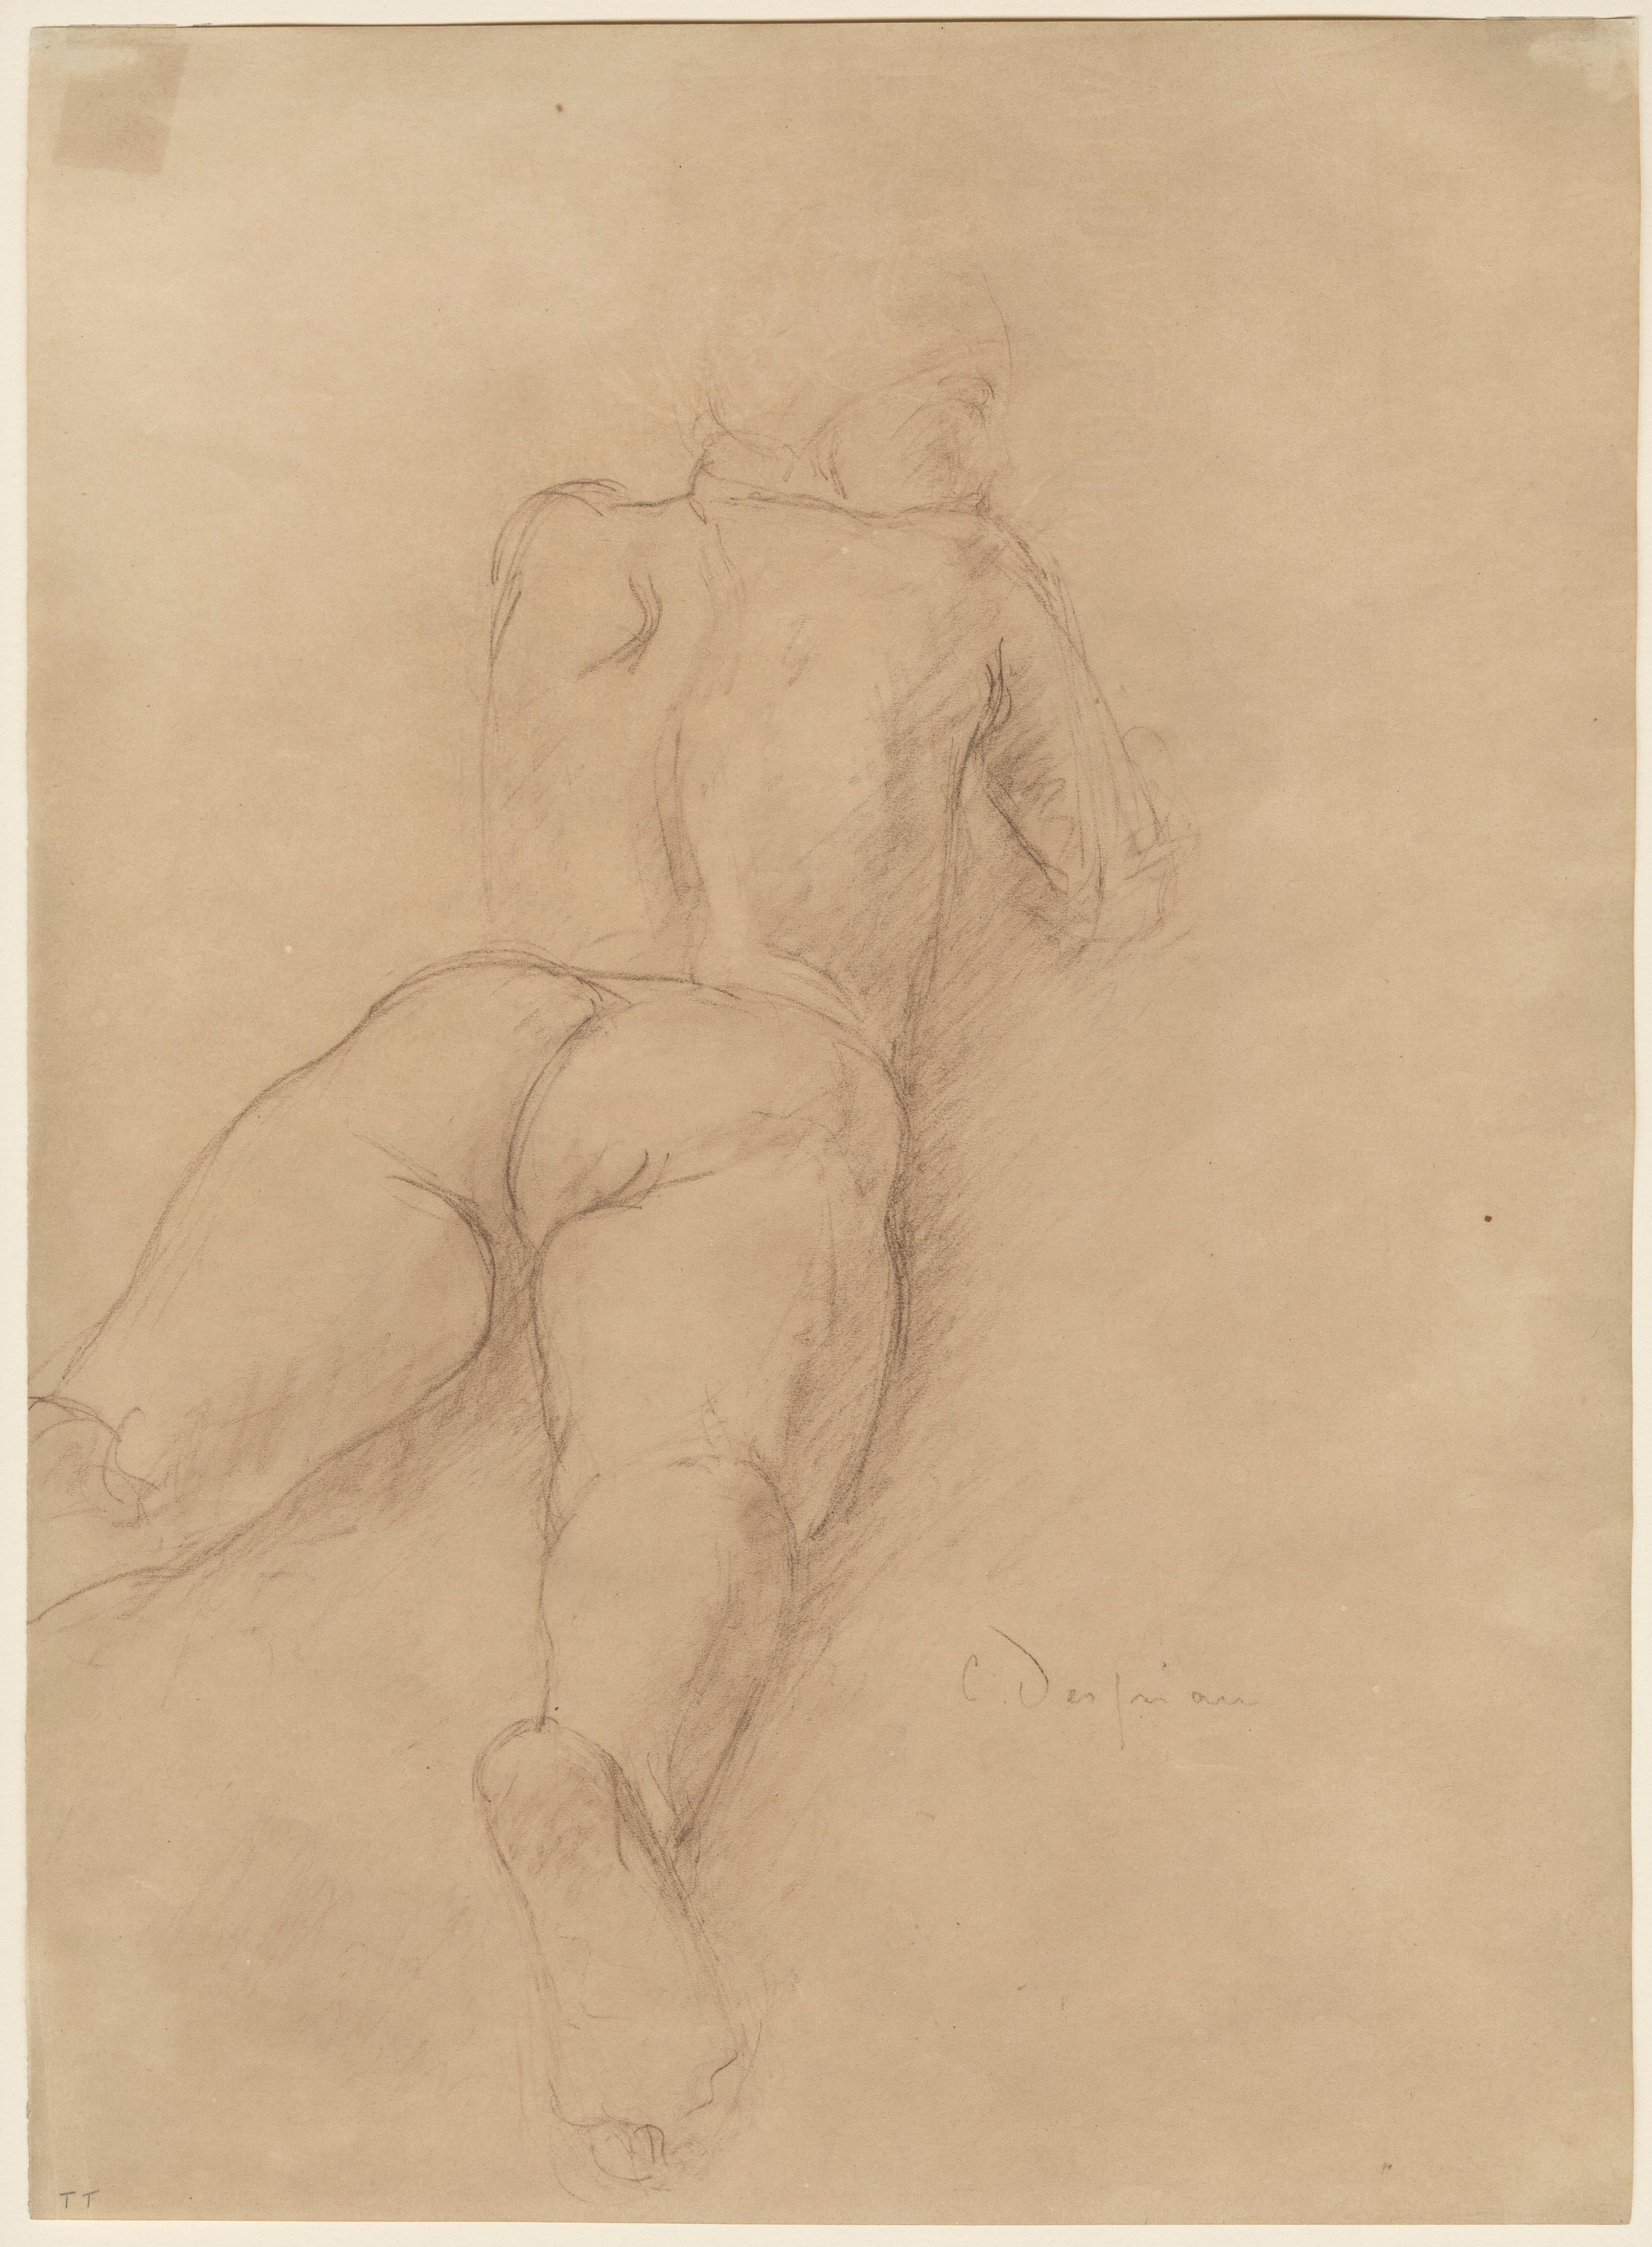 Male Nude reclining, seen from rear - Art by Charles Despiau